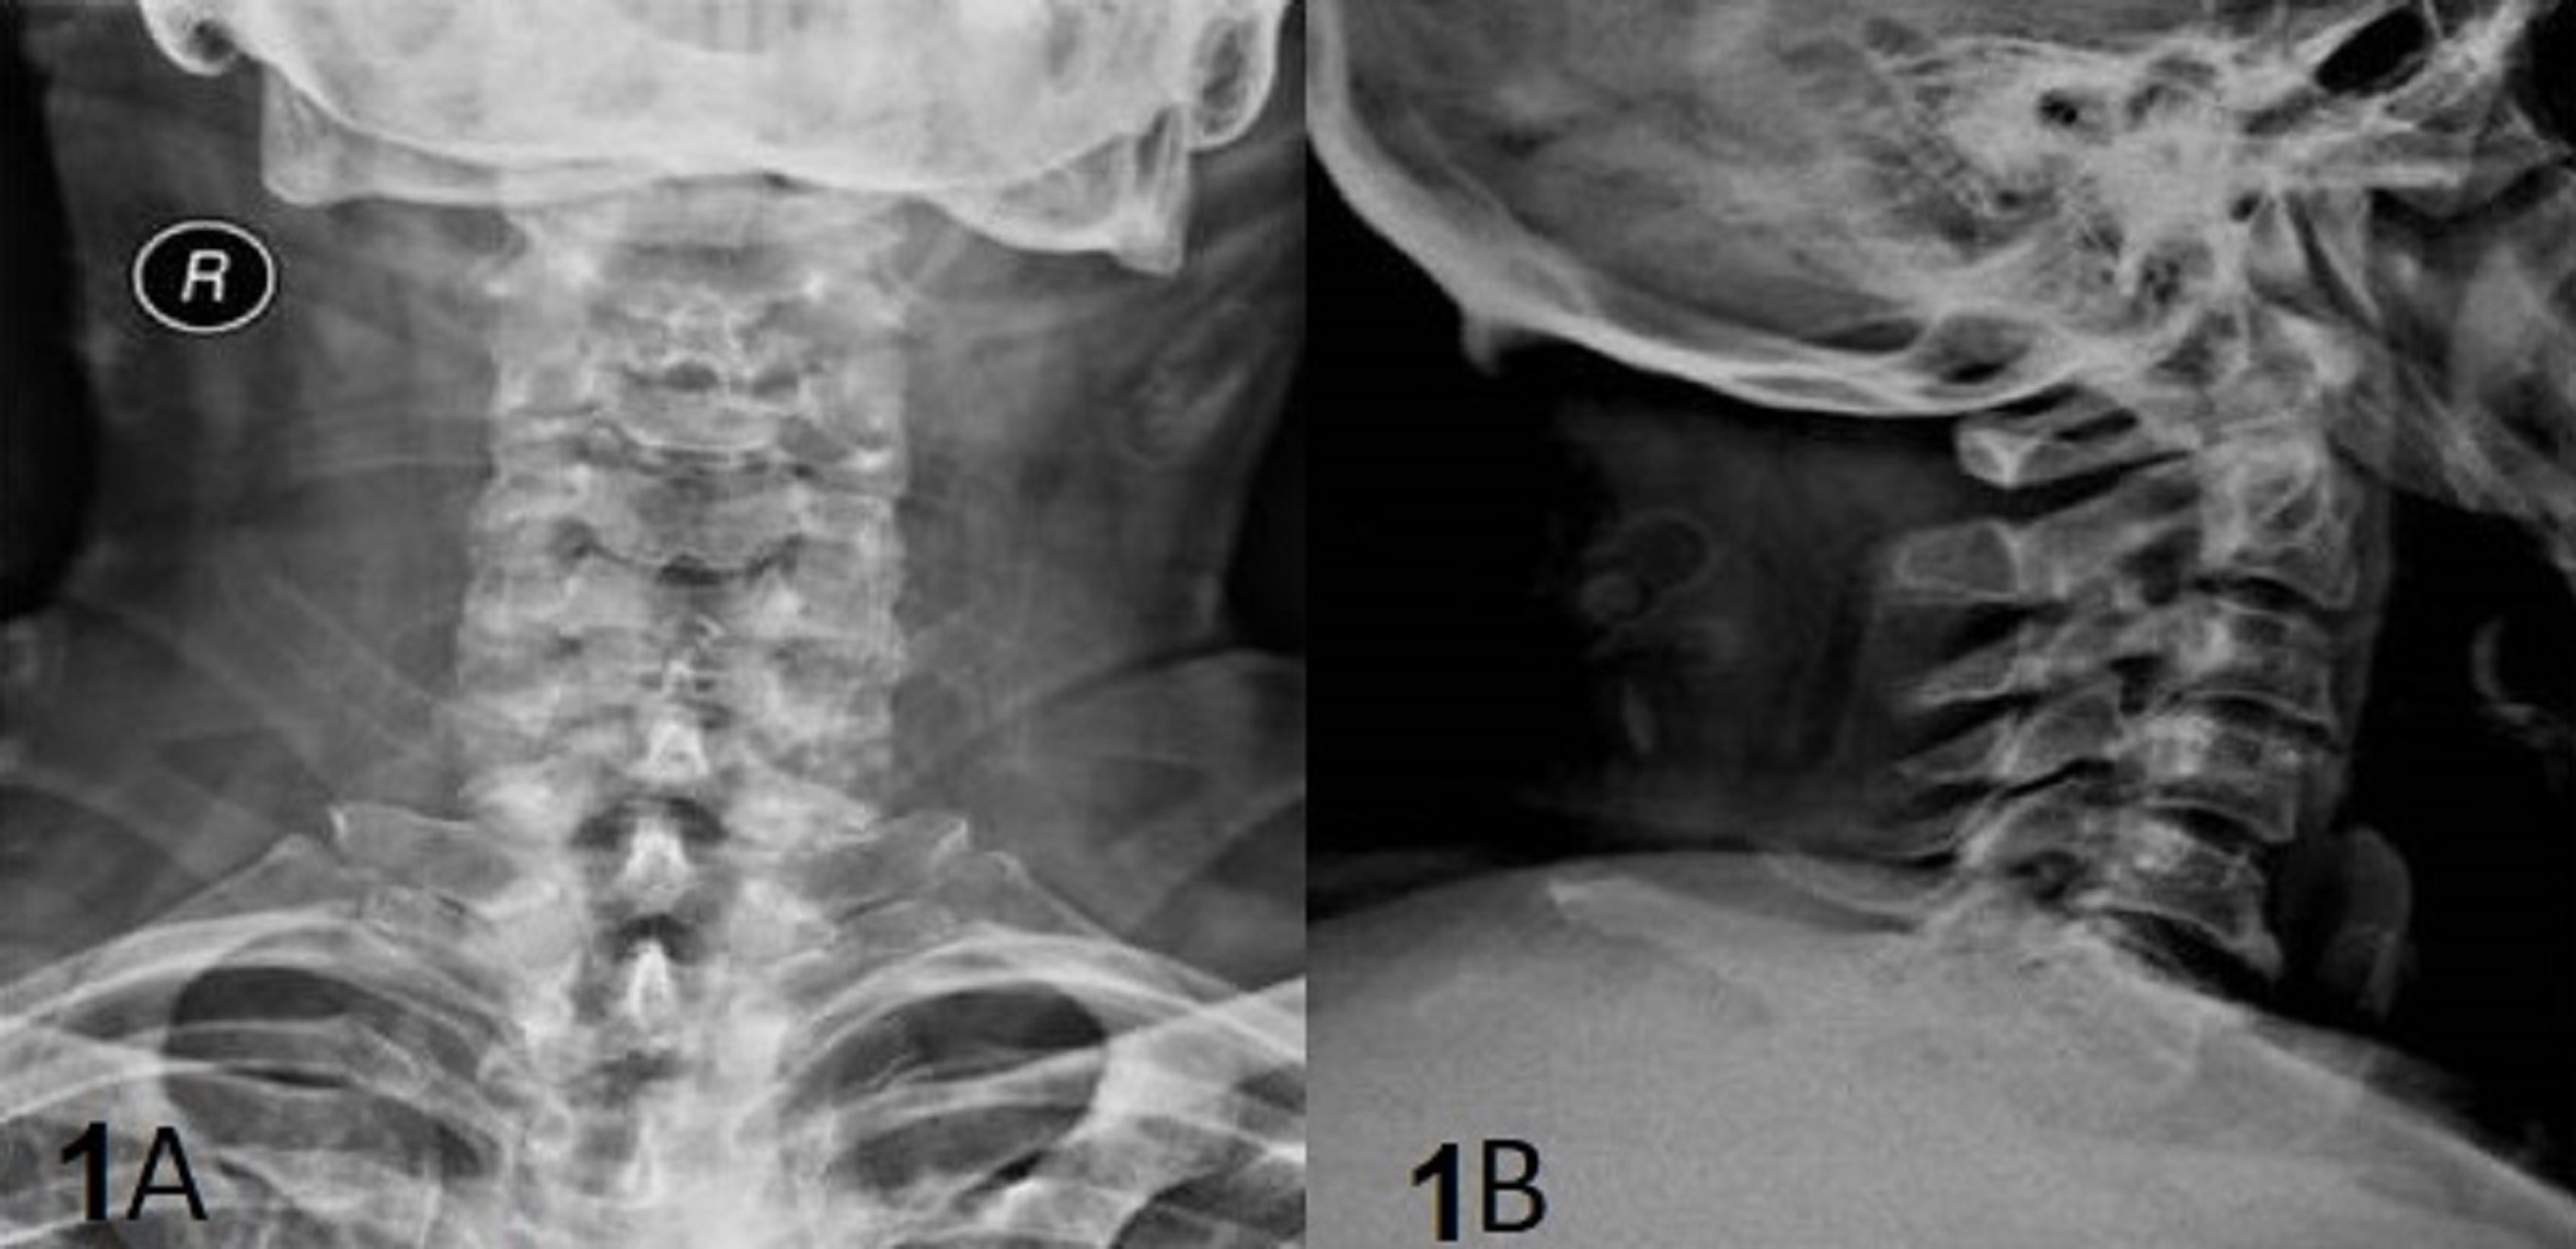 abnormal cervical spine x ray